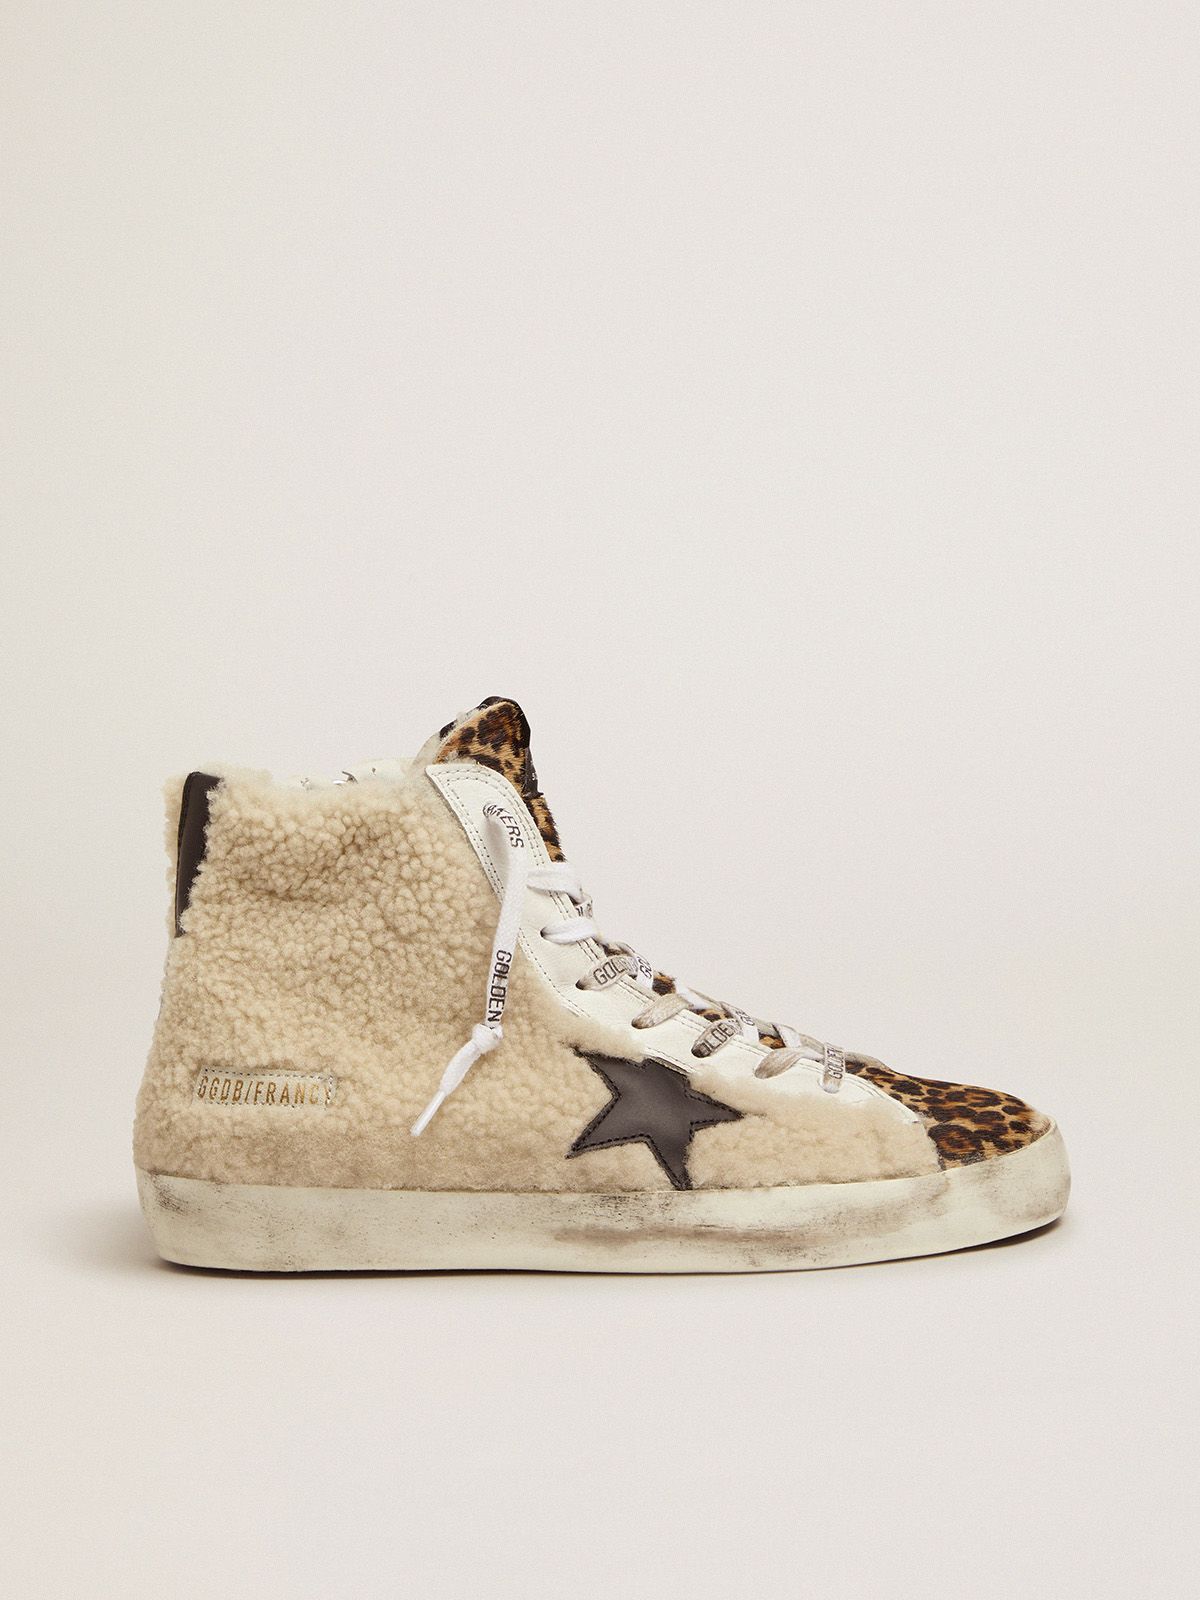 Francy sneakers made of shearling and pony skin with a leopard print